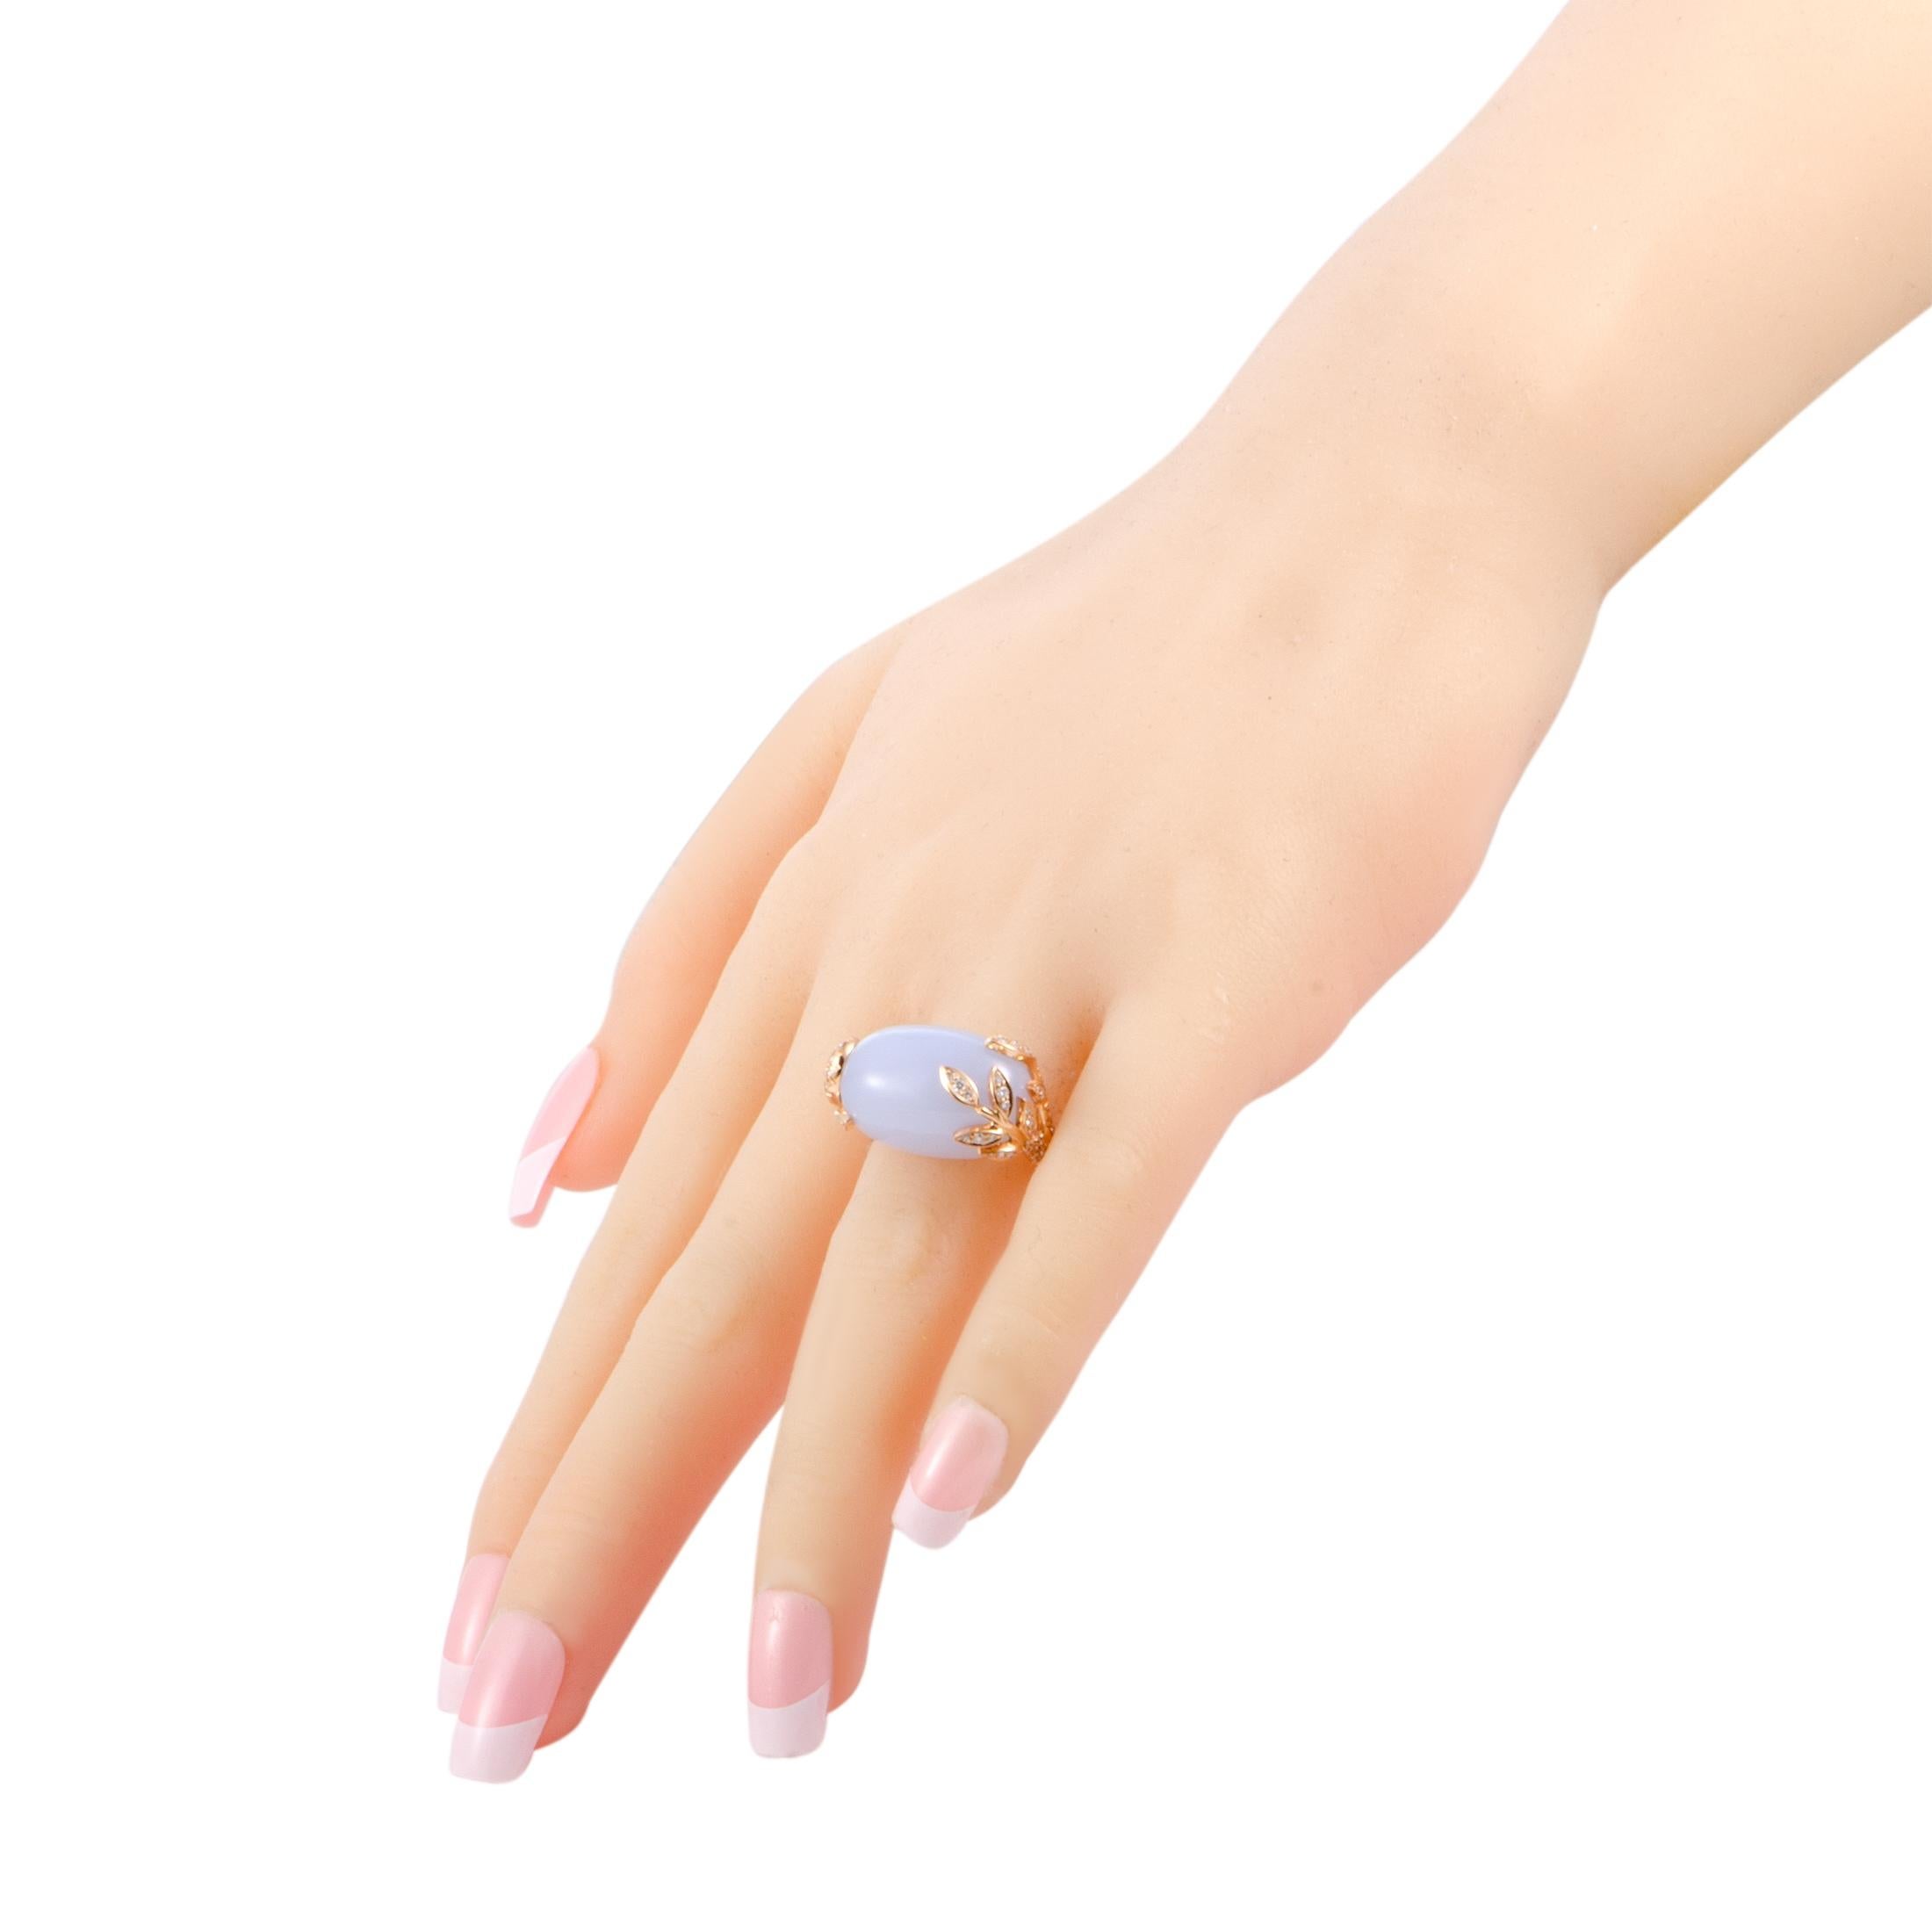 Presented with an exceptionally charming design that is luxuriously topped off with resplendent gems, this fabulous ring boasts a stunningly fashionable appeal. The ring is created by Mikimoto and it is wonderfully made of 18K rose gold, weighing